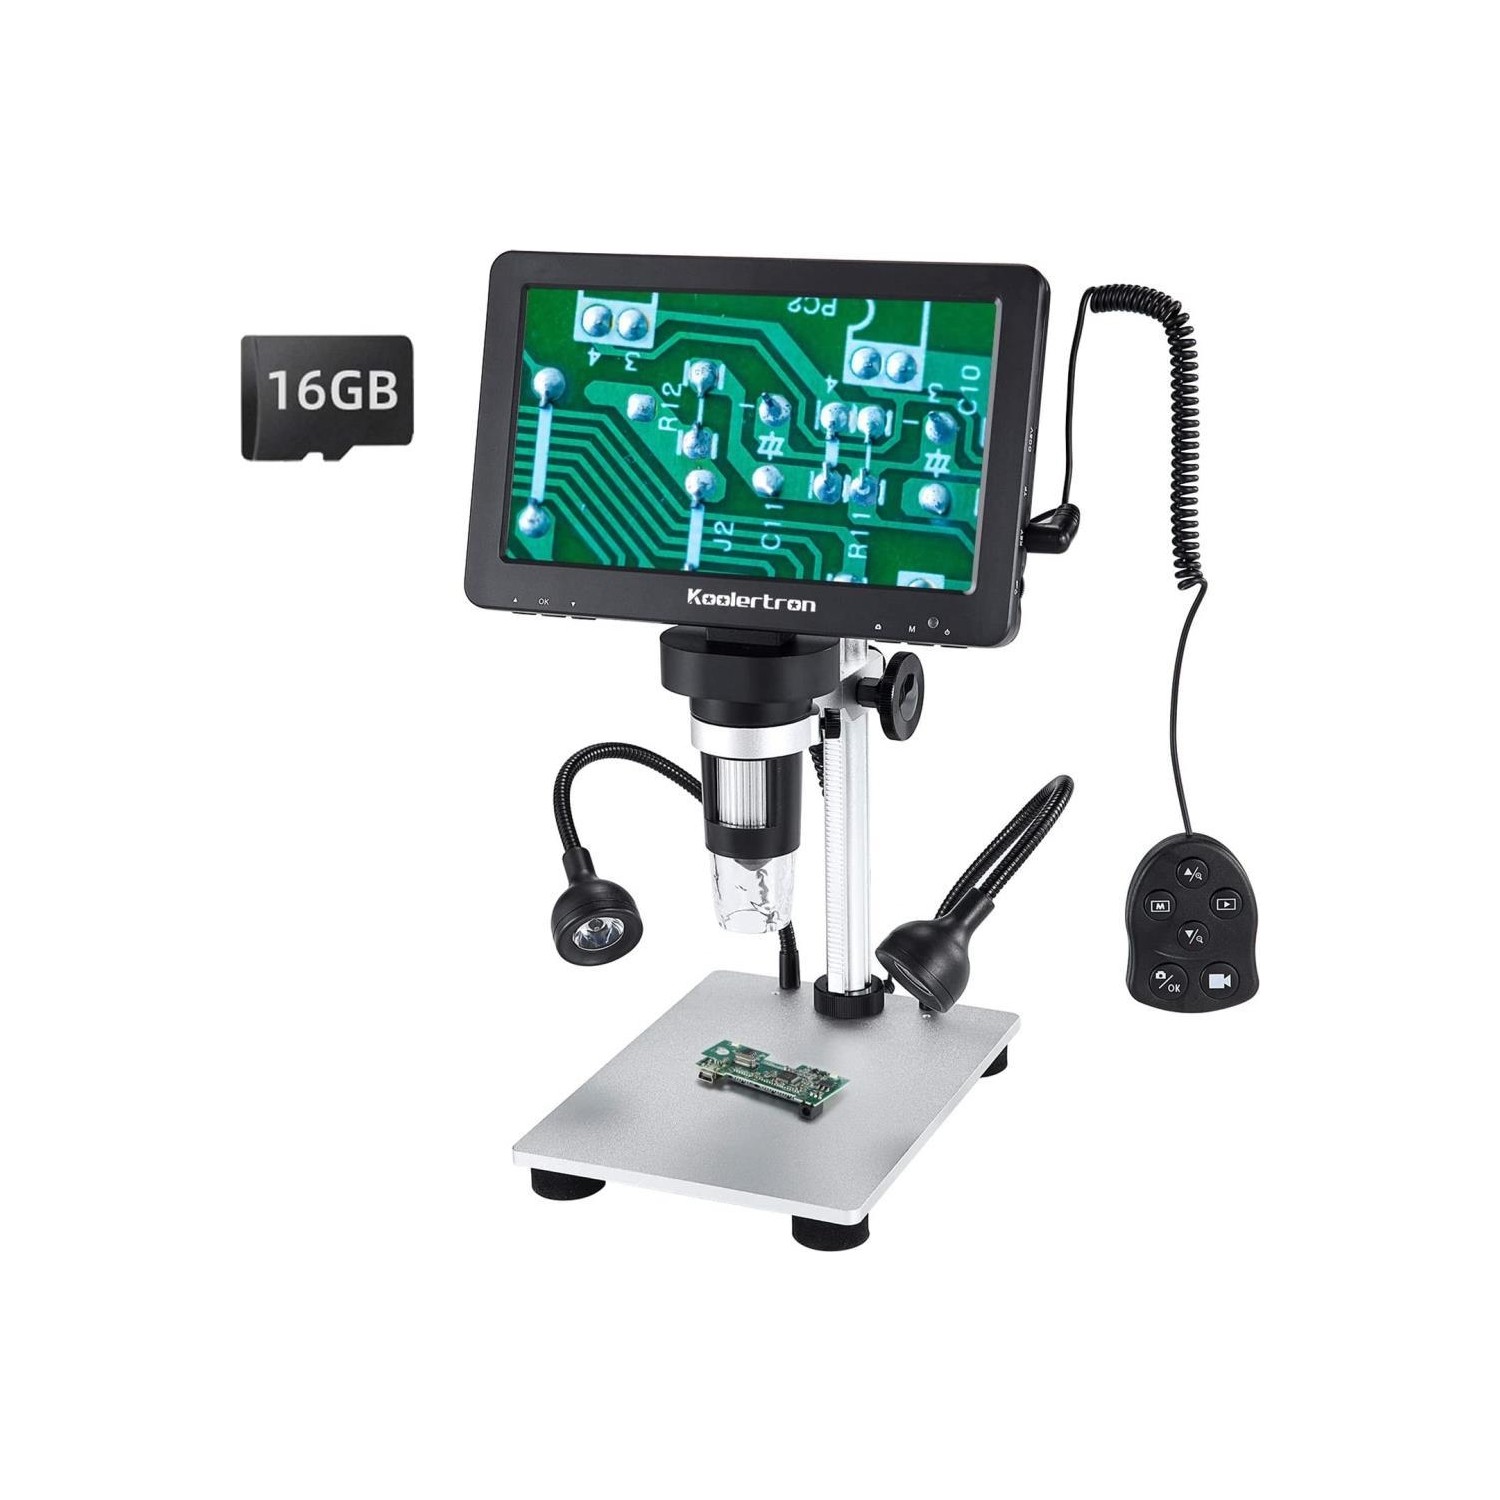 7 inch LCD Digital USB Microscope Angle Adjustable with Remote Control,Koolertron 12MP 1920x1080 30fps Video Recorder Image Flip/Reverse Color/Black & White for Circuit Board Repair Soldering PCB Coin 